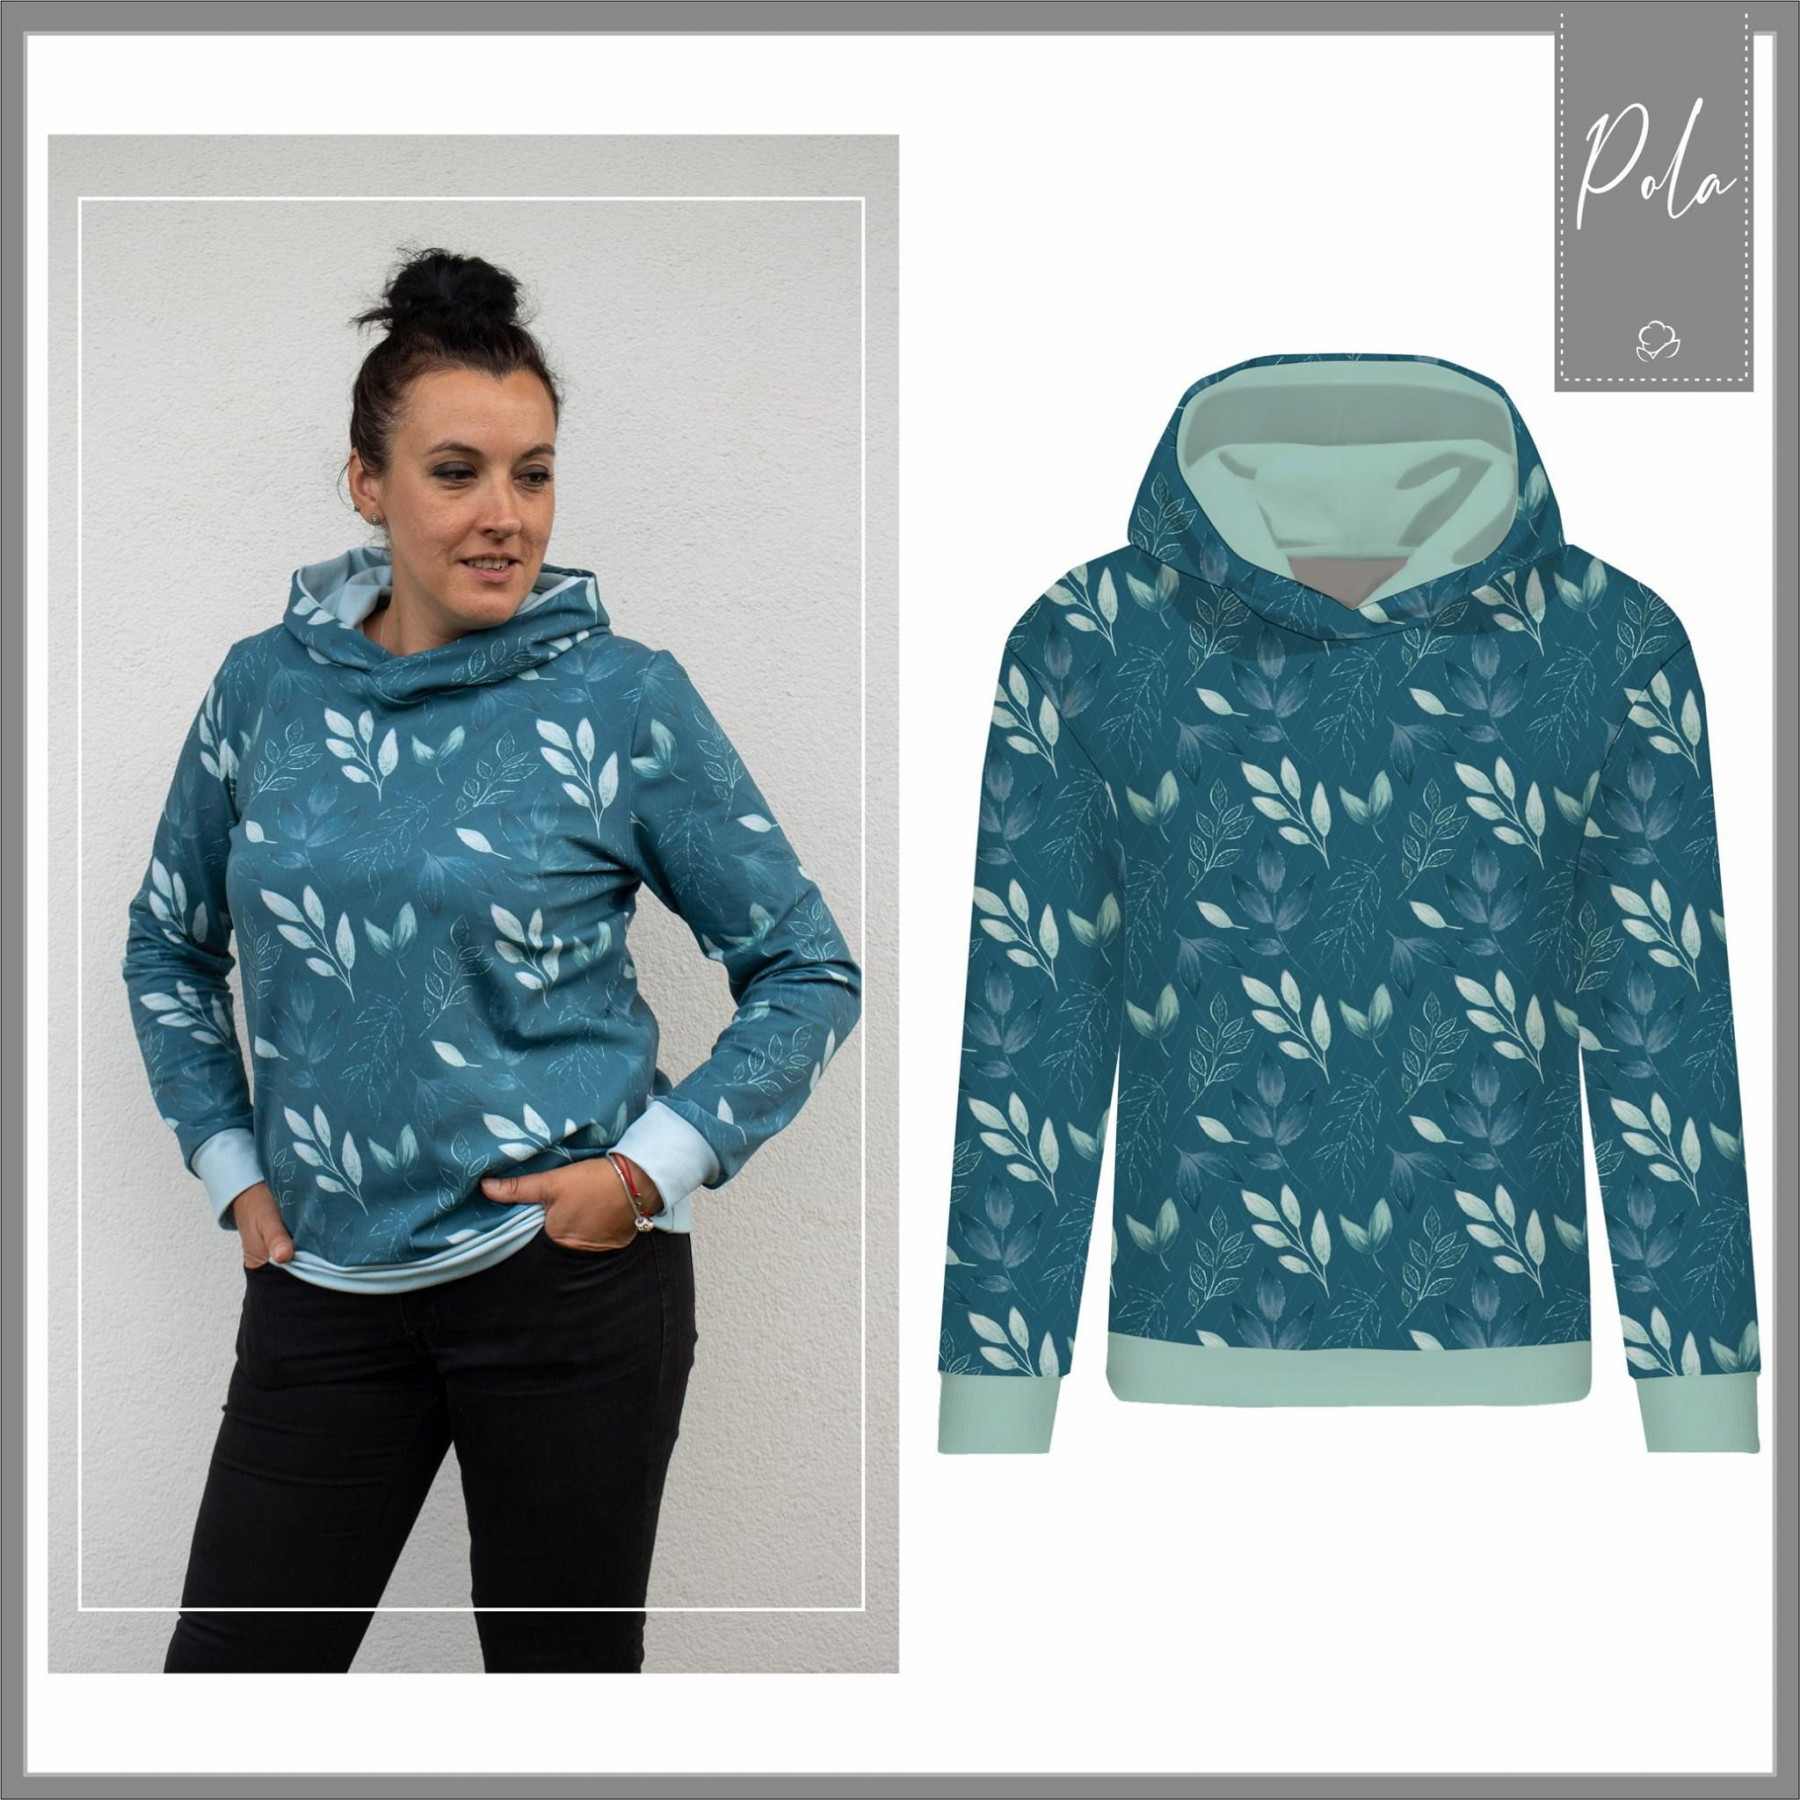 CLASSIC WOMEN’S HOODIE (POLA) - LET IT SNOW PAT. 2 (WINTER IN THE CITY) - looped knit fabric 